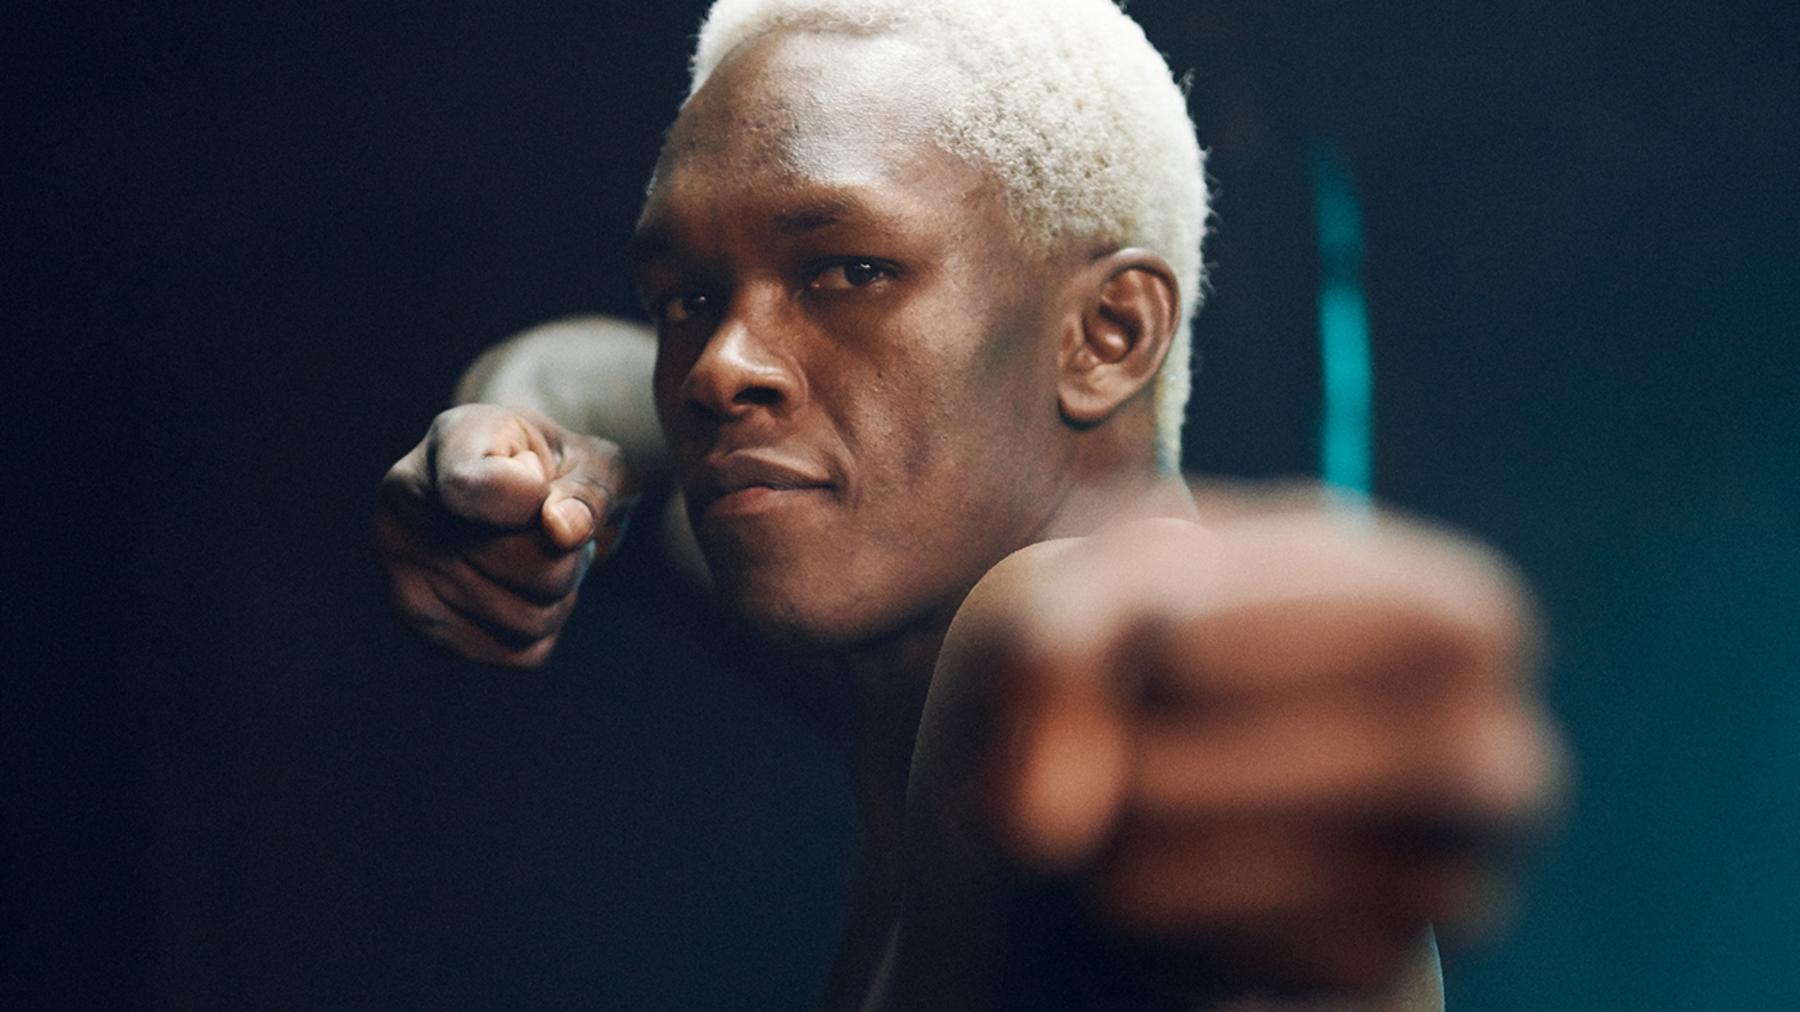 Israel Adesanya Looks Bulked In 'Not Even' His 'Final Form' Prior